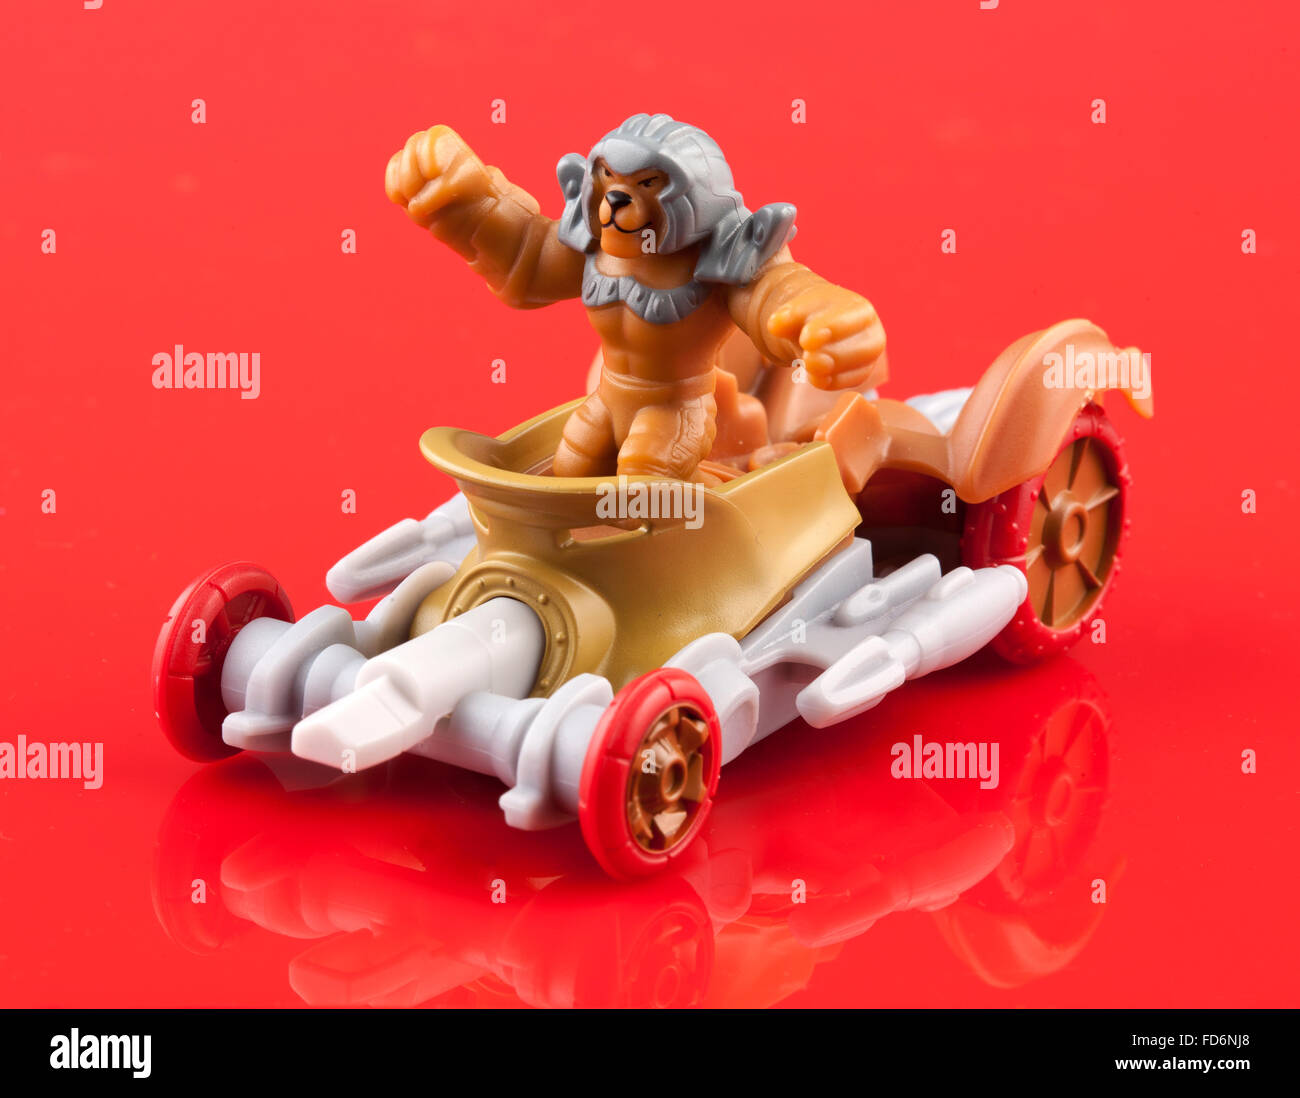 Hot wheels toy 2010 'Kalus and Fangor' on red background Stock Photo